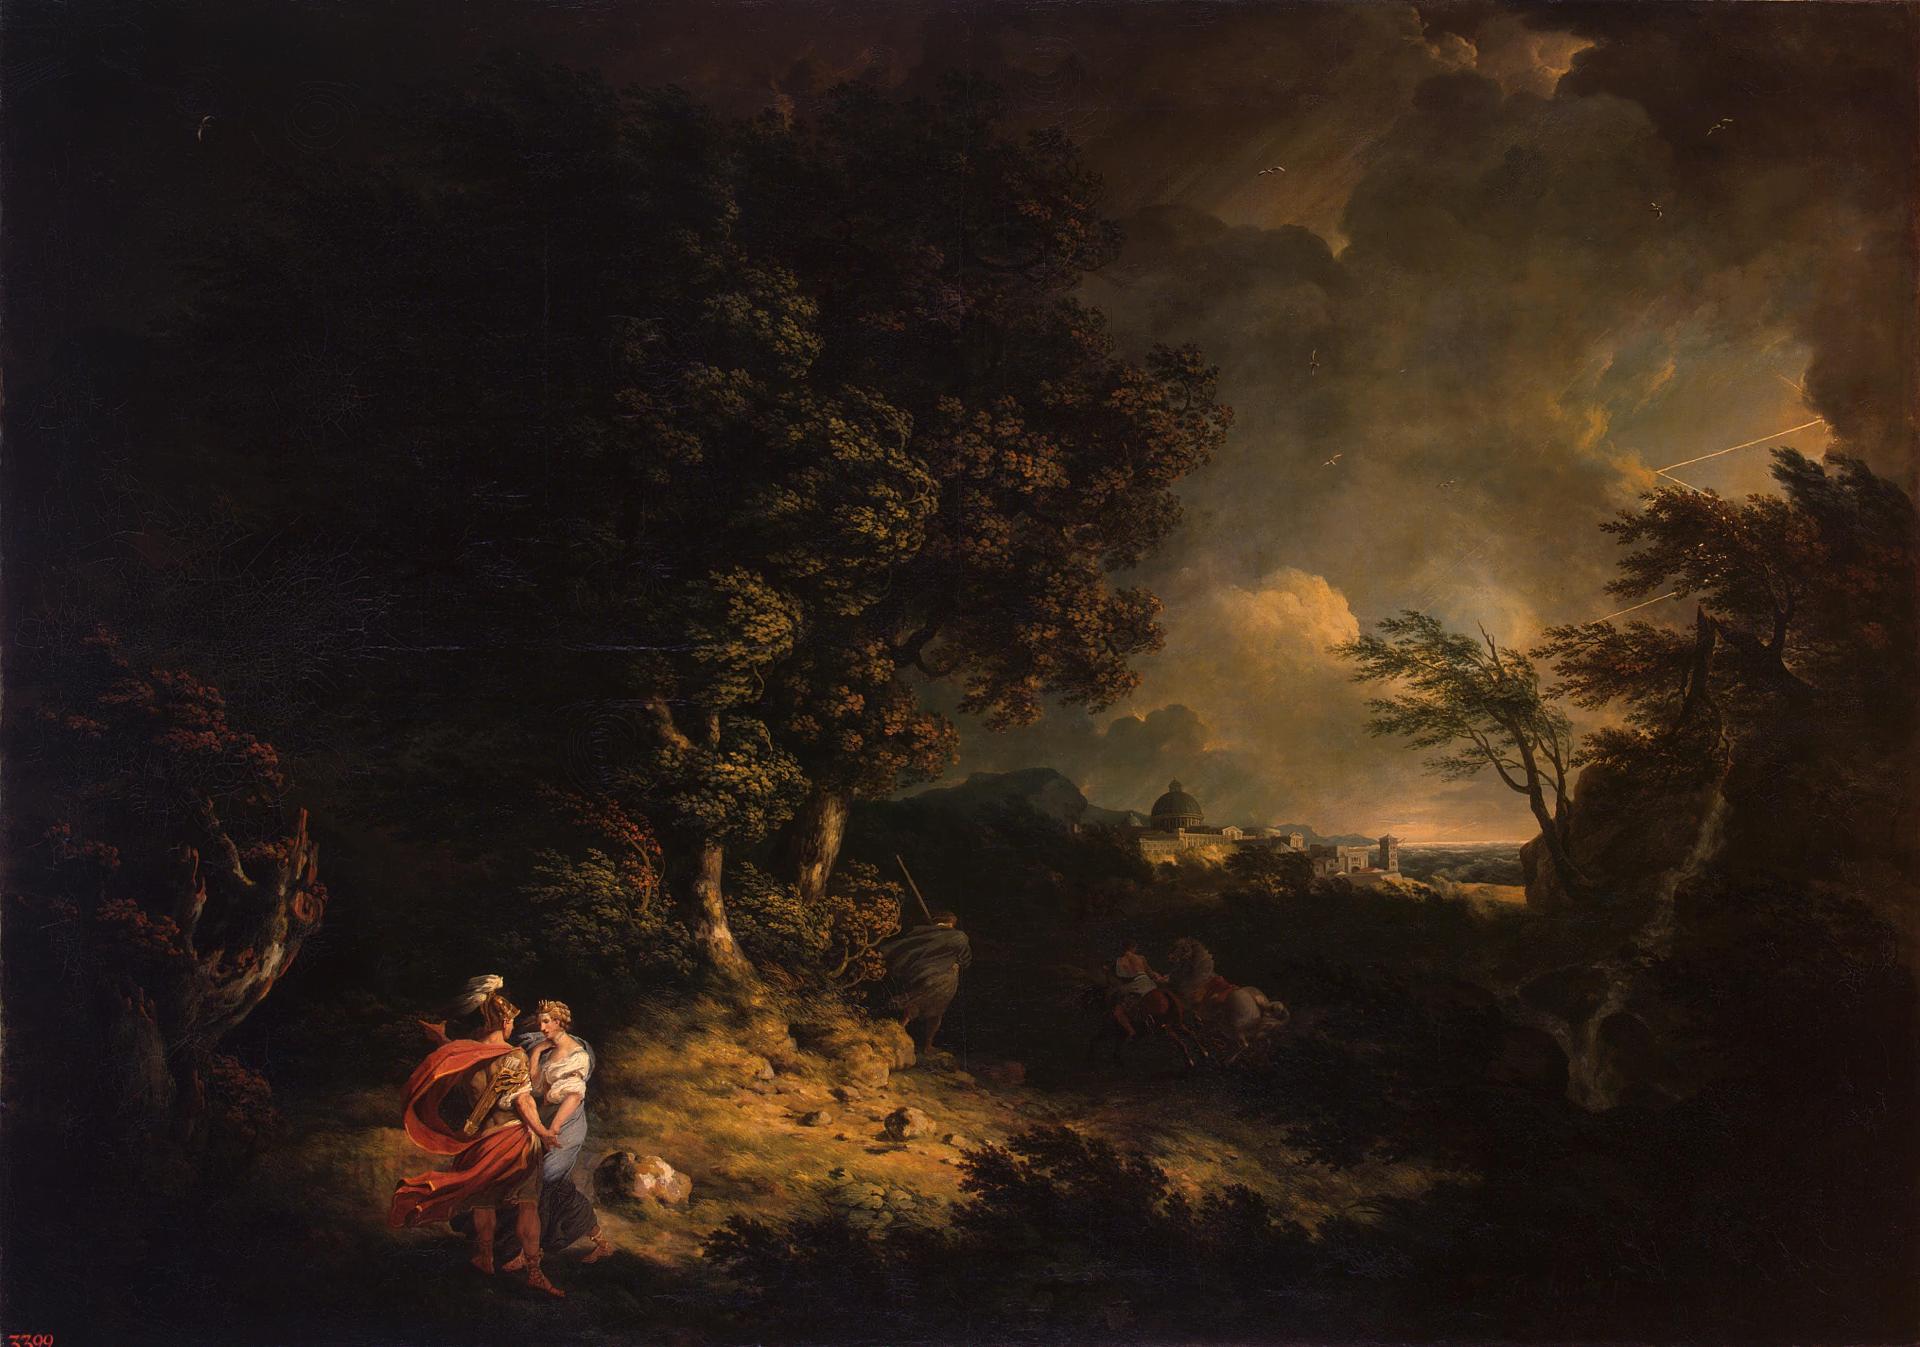 Landscape with Dido and Aeneas by Thomas Jones